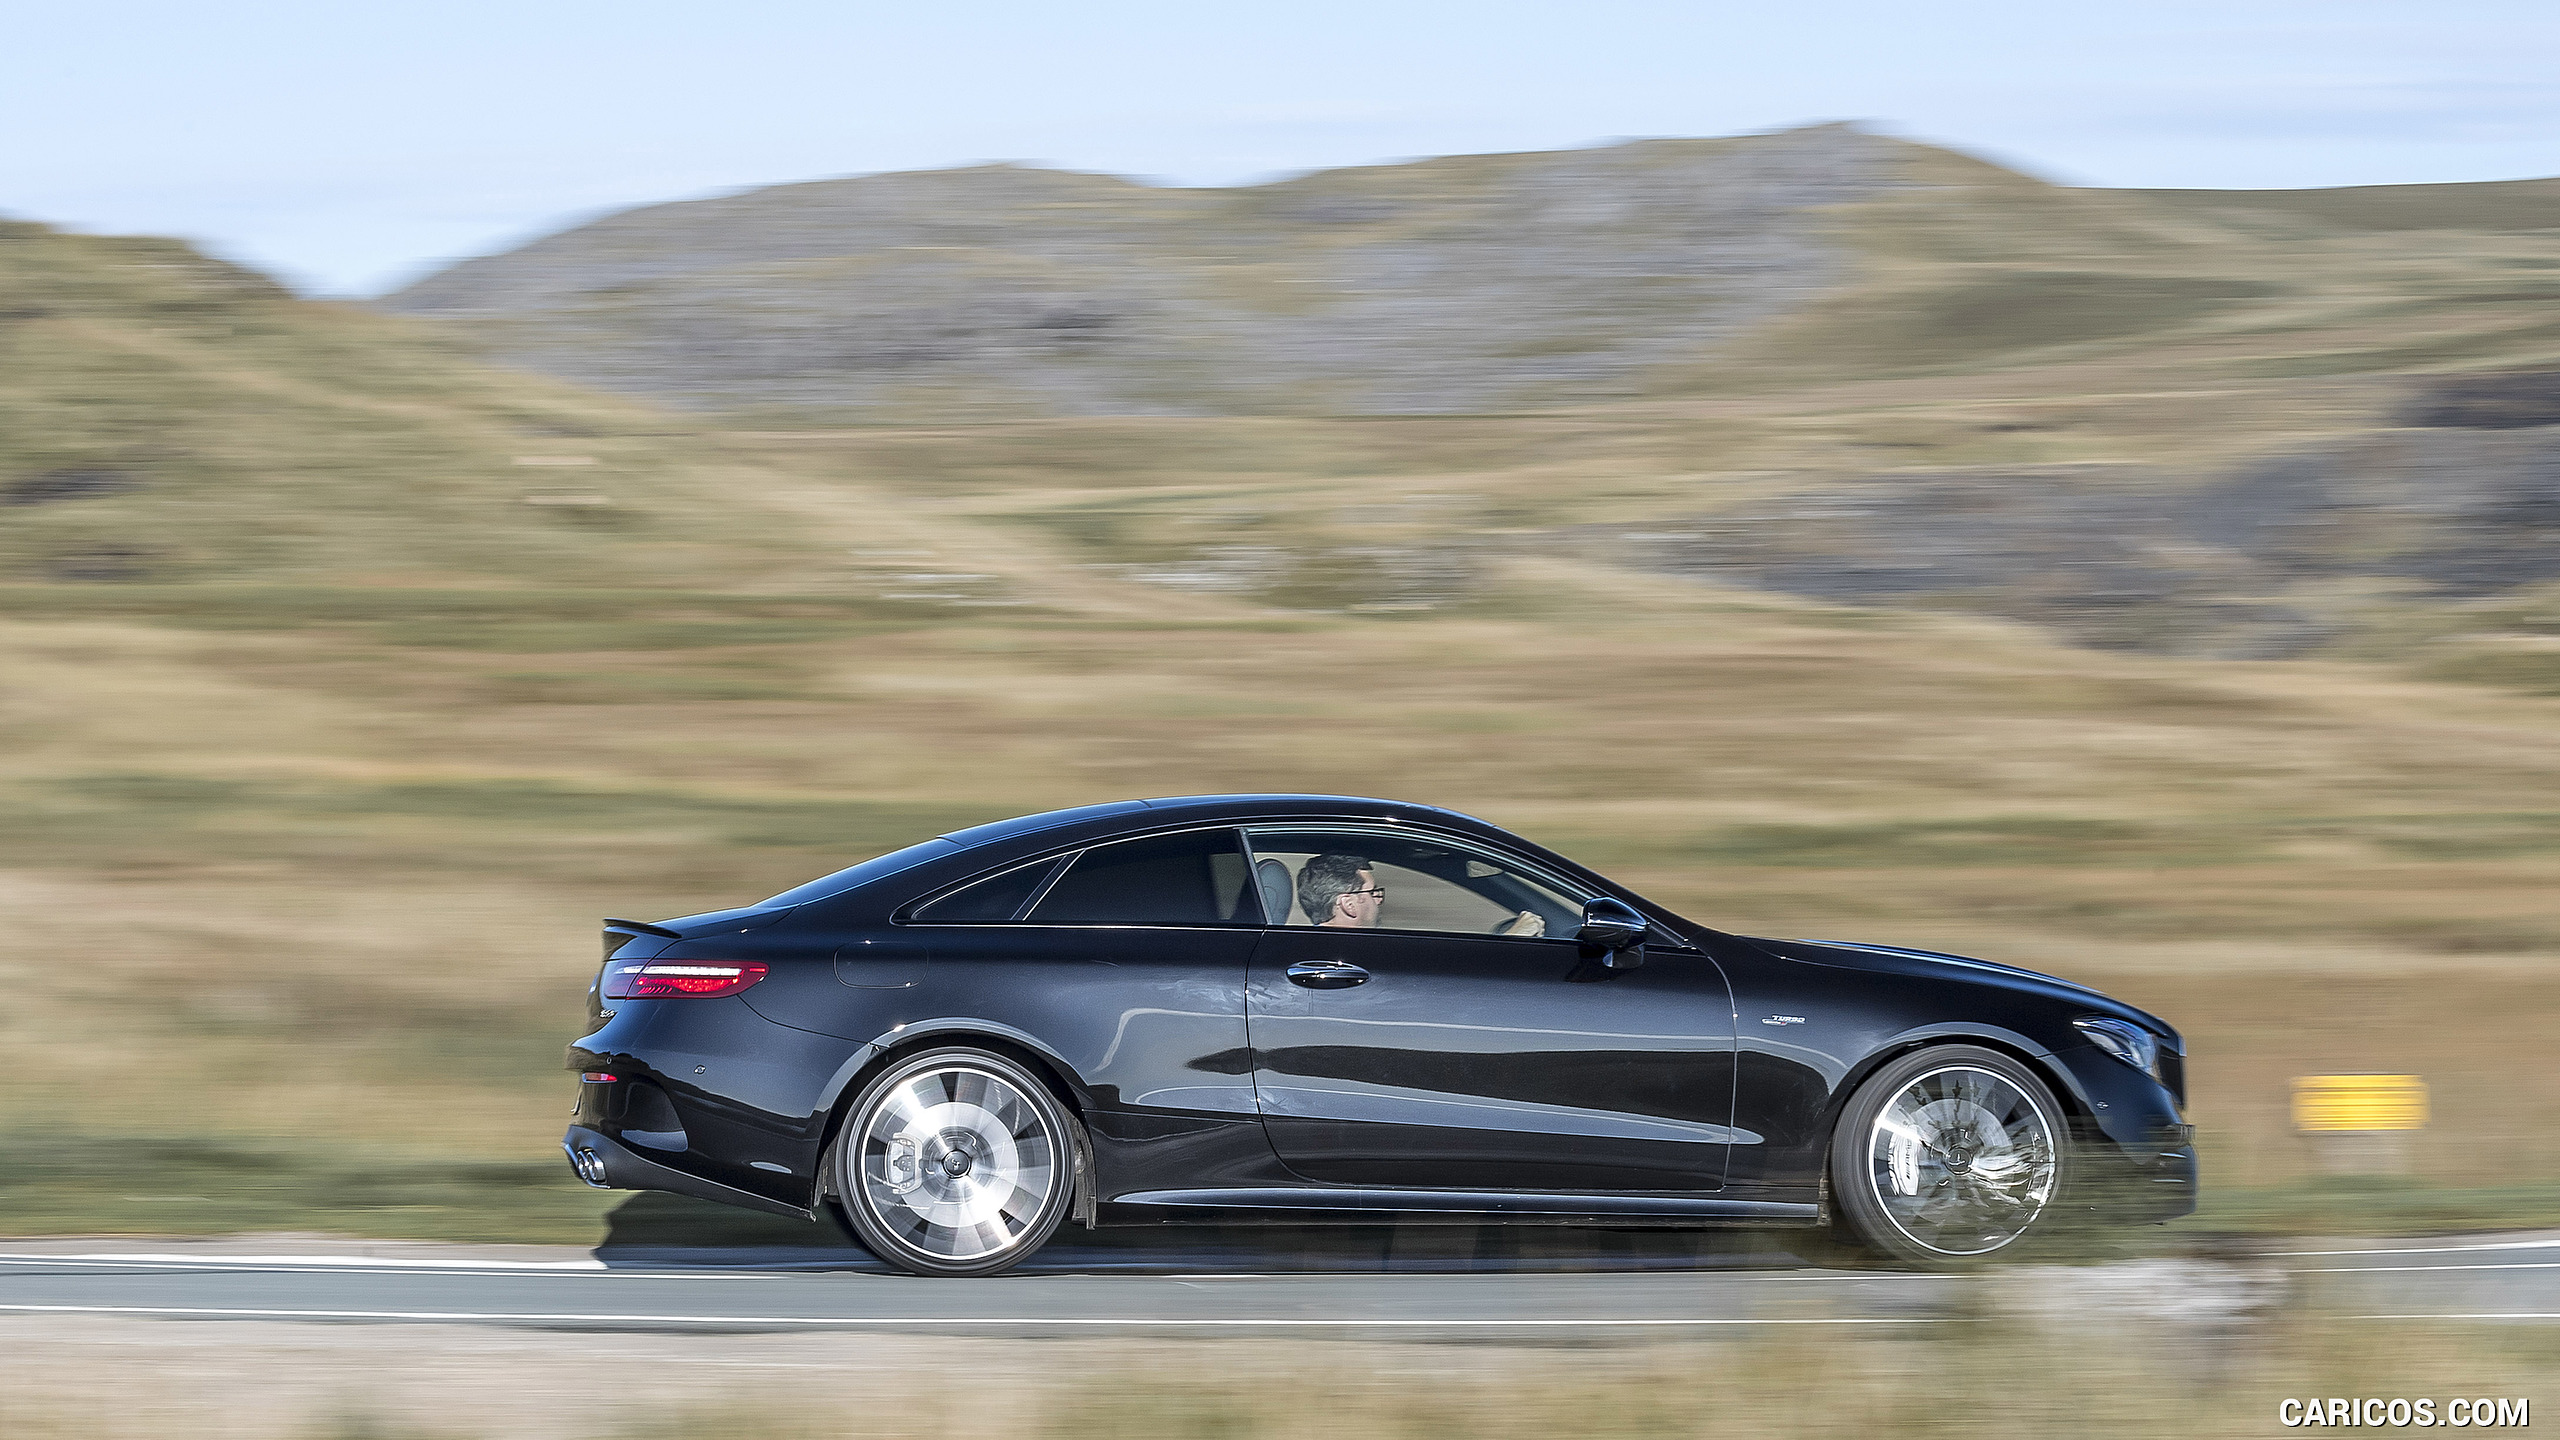 2019 Mercedes-AMG E 53 Coupe (UK-Spec) - Side, #16 of 166